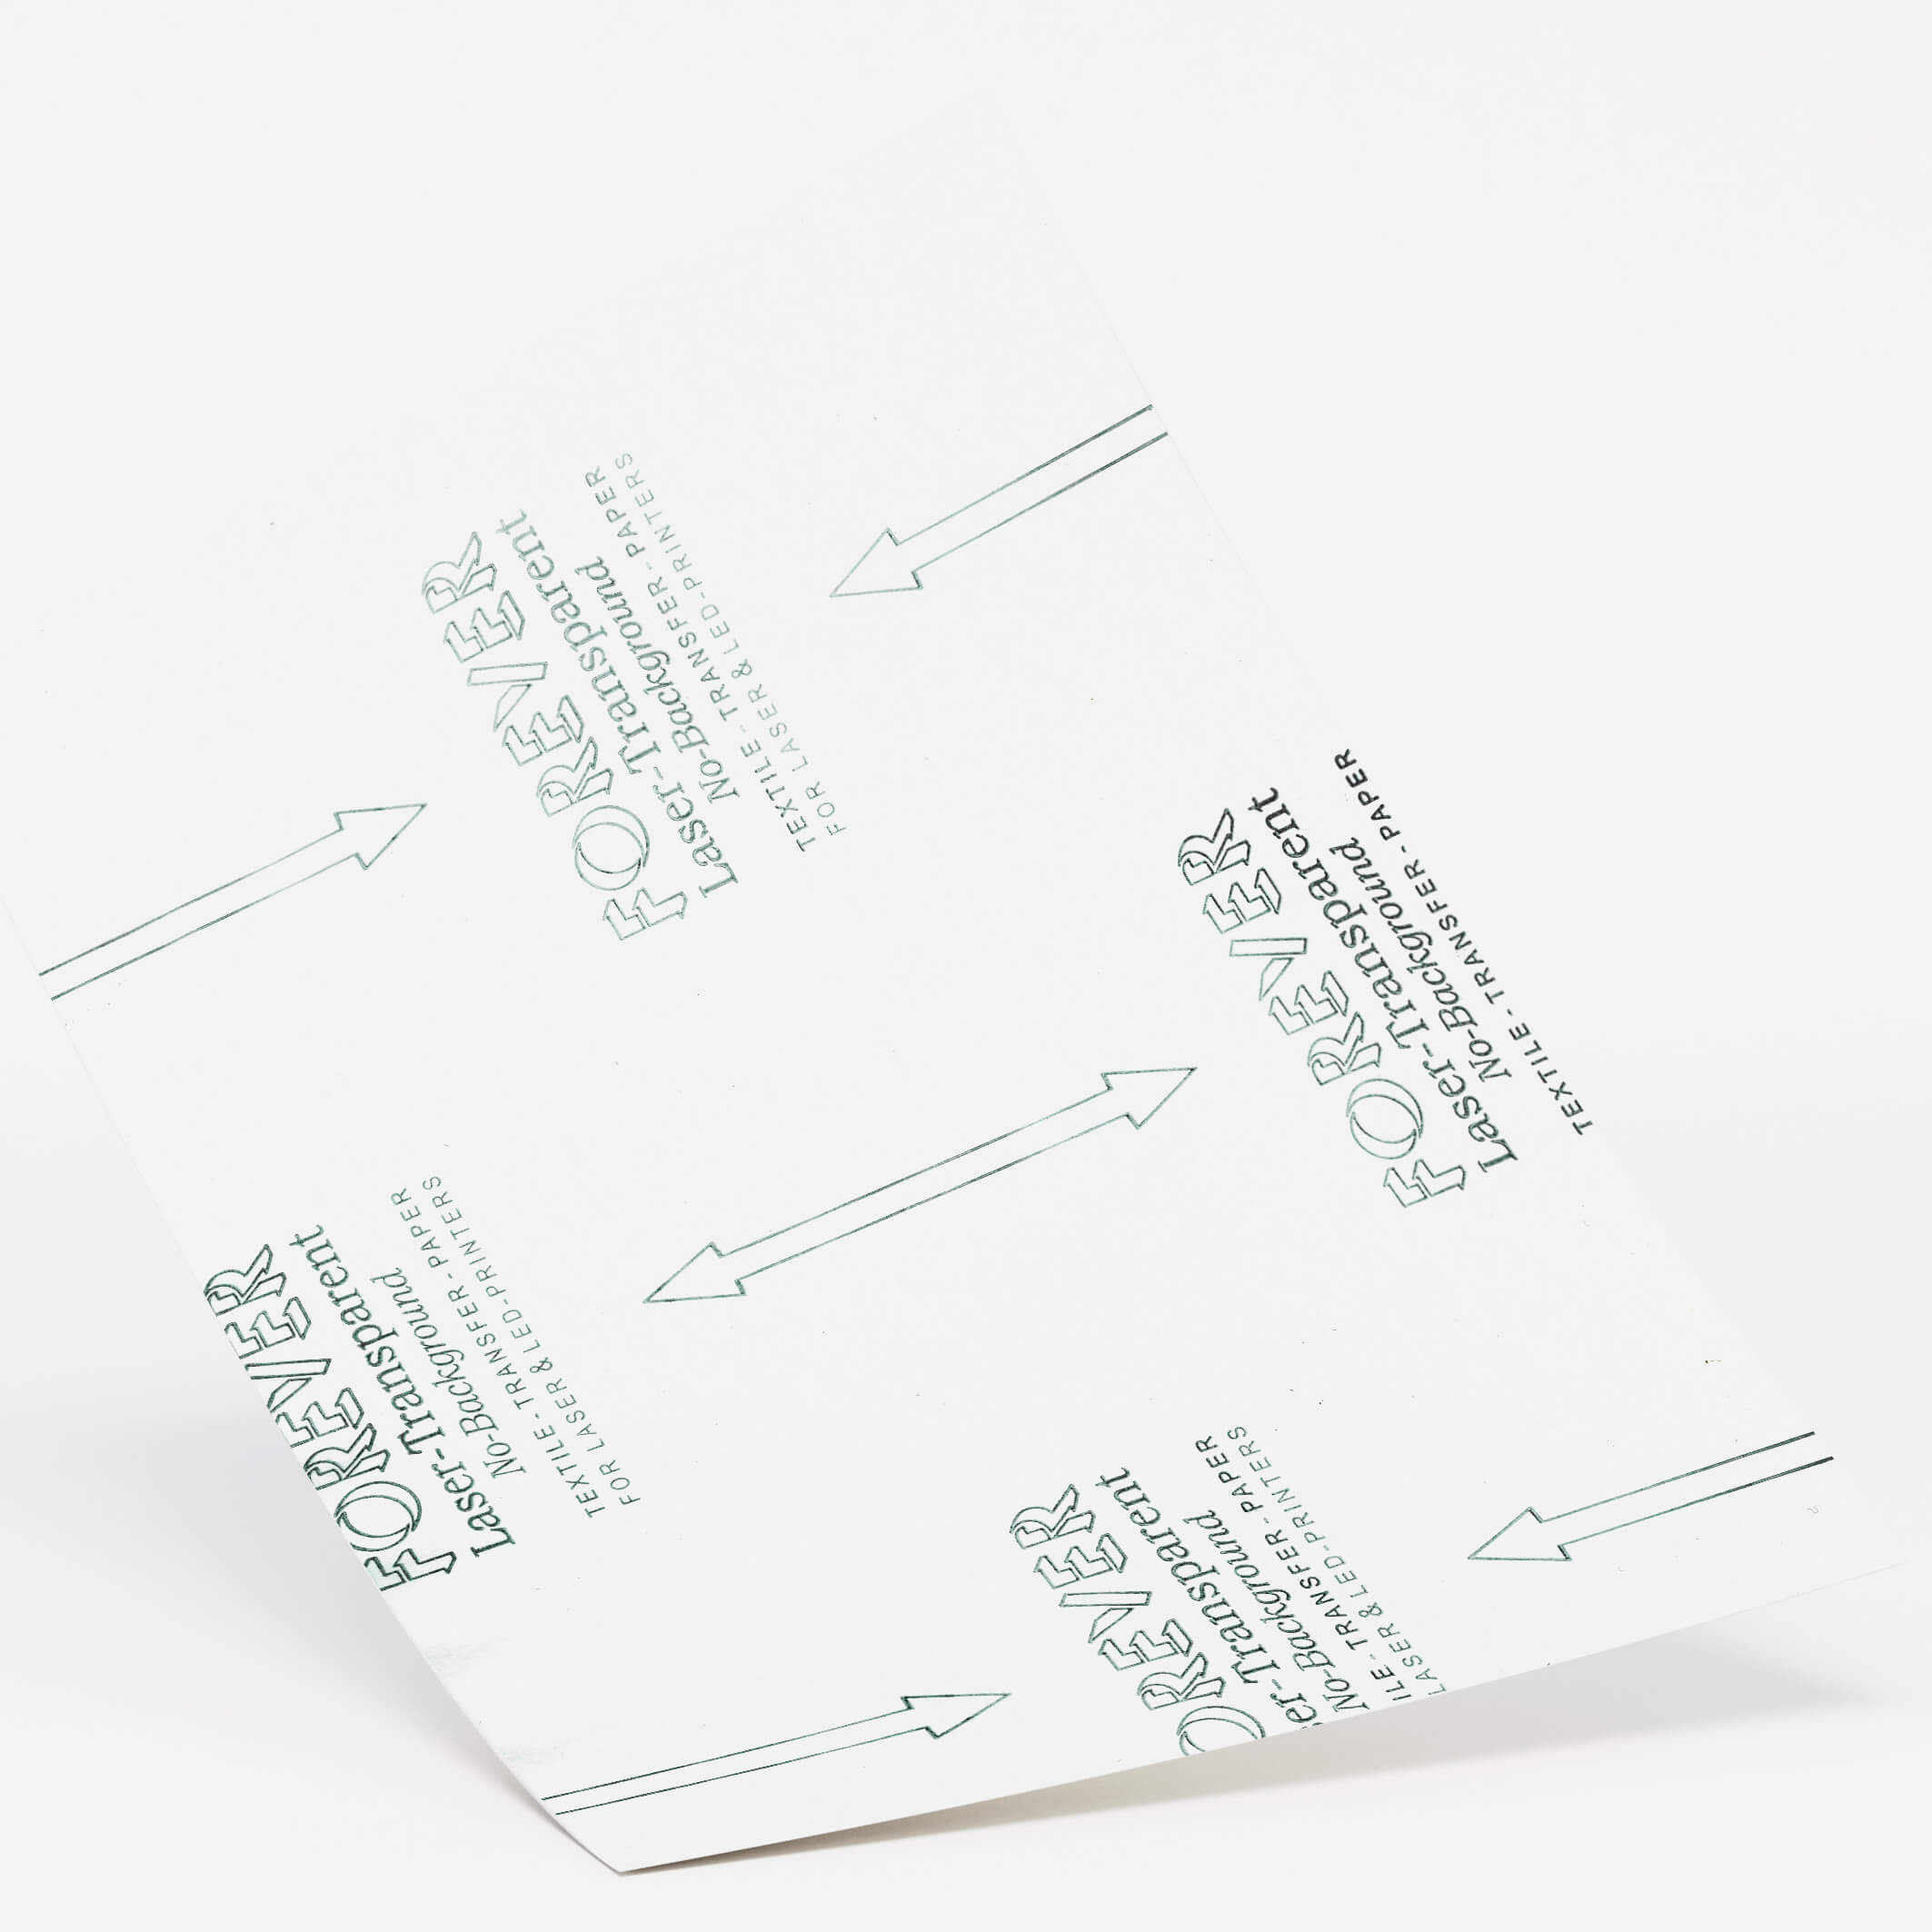 FOREVER Laser Tattoo Paper - A4 Size Packs